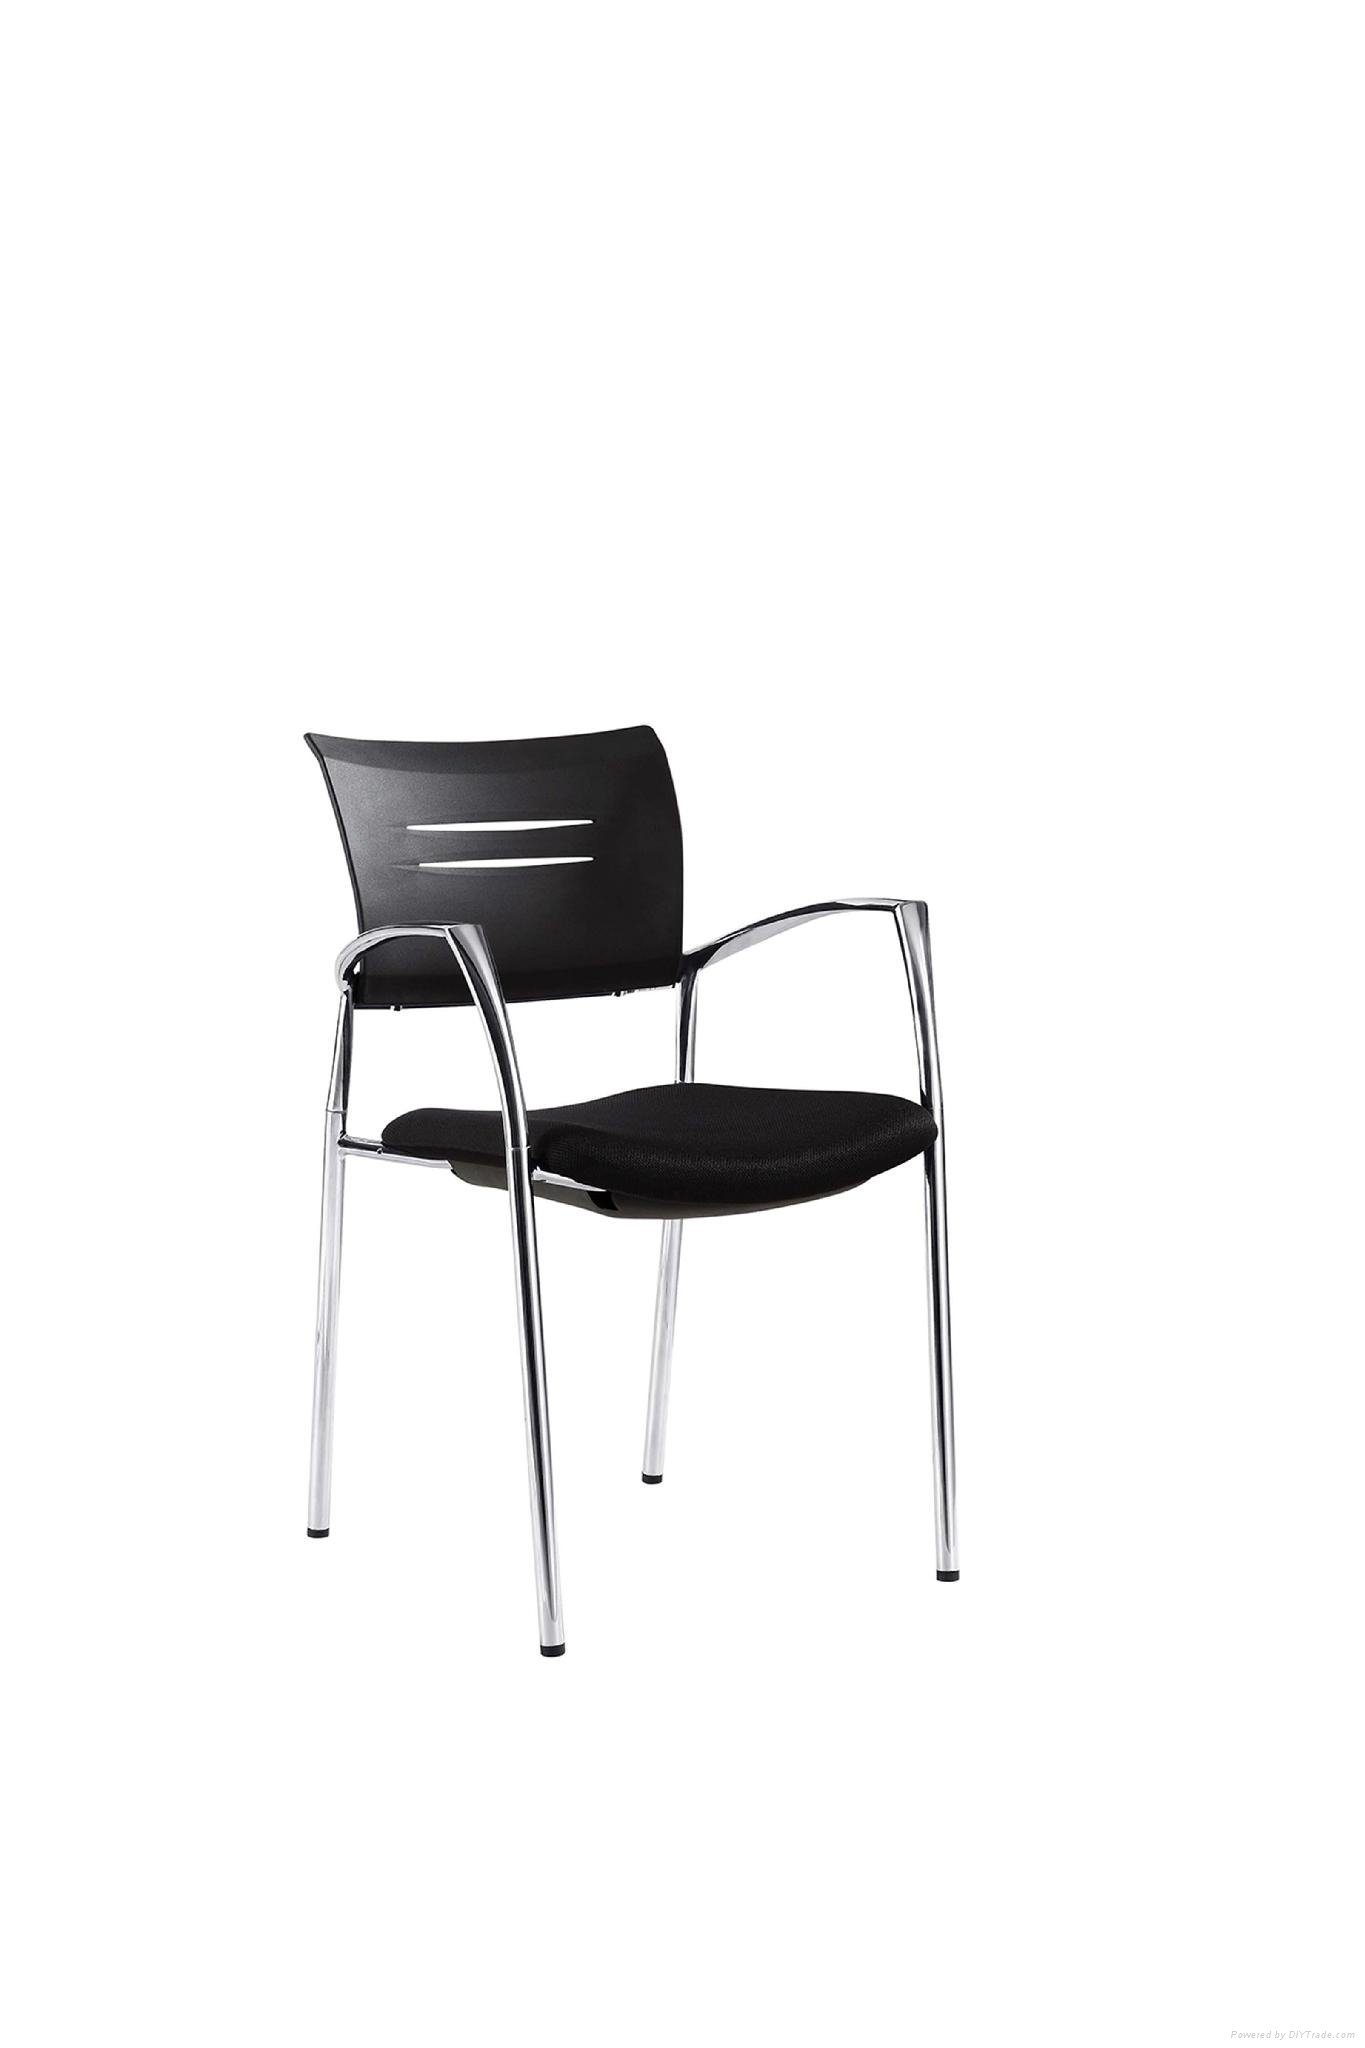 meeting chair without wheels 2